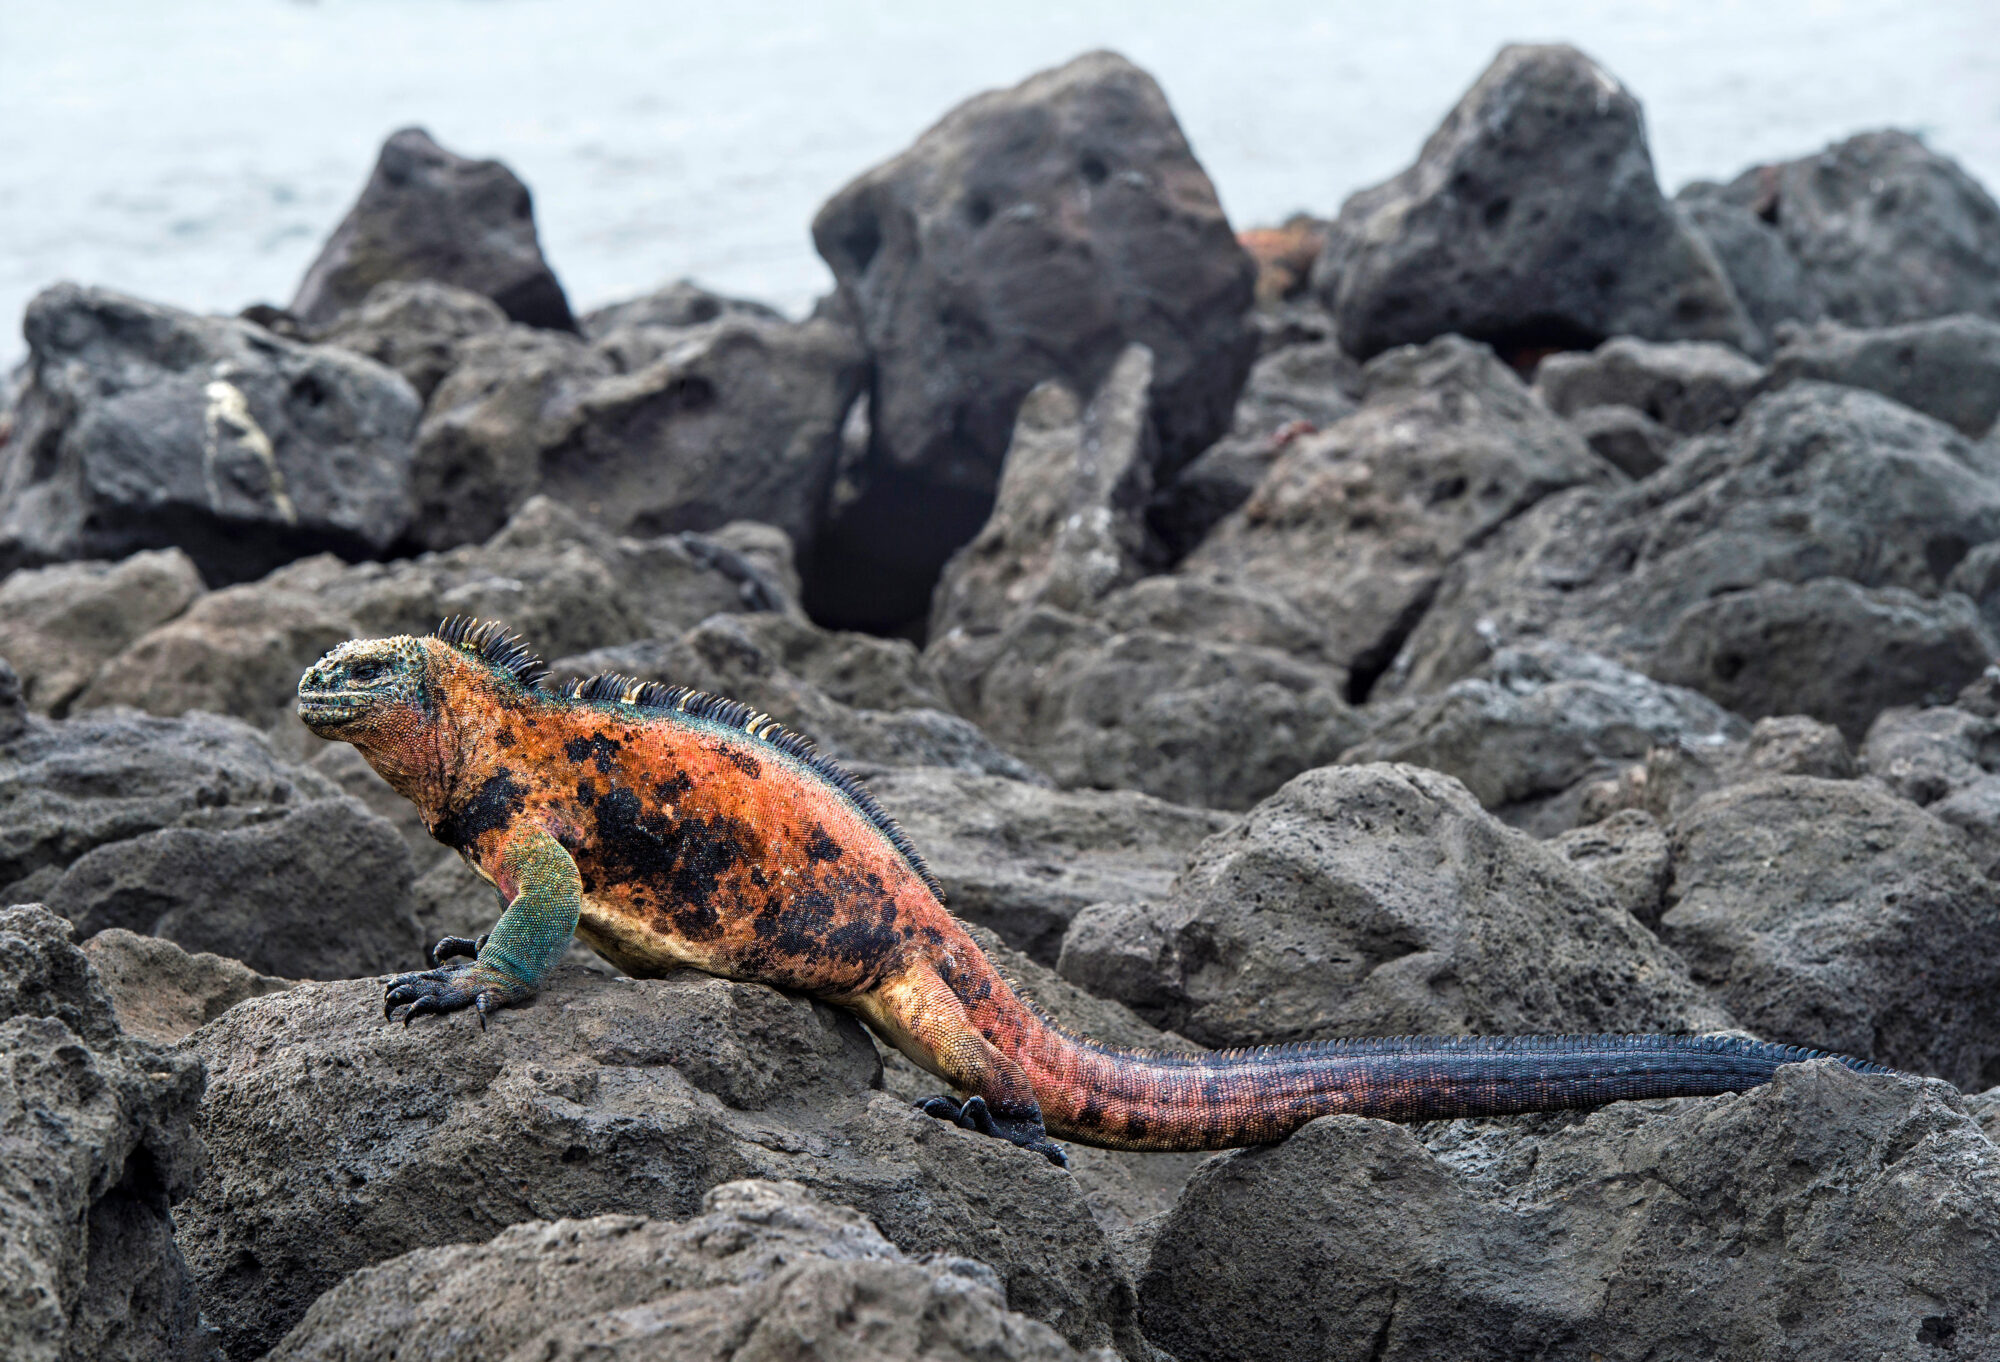 <p>A brightly-colored marine iguana, an endemic species of the Galapagos Islands in Ecuador (image: <a href="https://www.alamy.com/search/imageresults.aspx?cid=772QZ2RZKFJ3B5SR5ELQCHFJJLE29HGGW4QSW9KZAD57EWJJJ7KCR7QW2E4HLJFU&amp;name=GFC%2bCollection&amp;st=12&amp;mode=0&amp;comp=1">GFC Collection</a> / Alamy)</p>